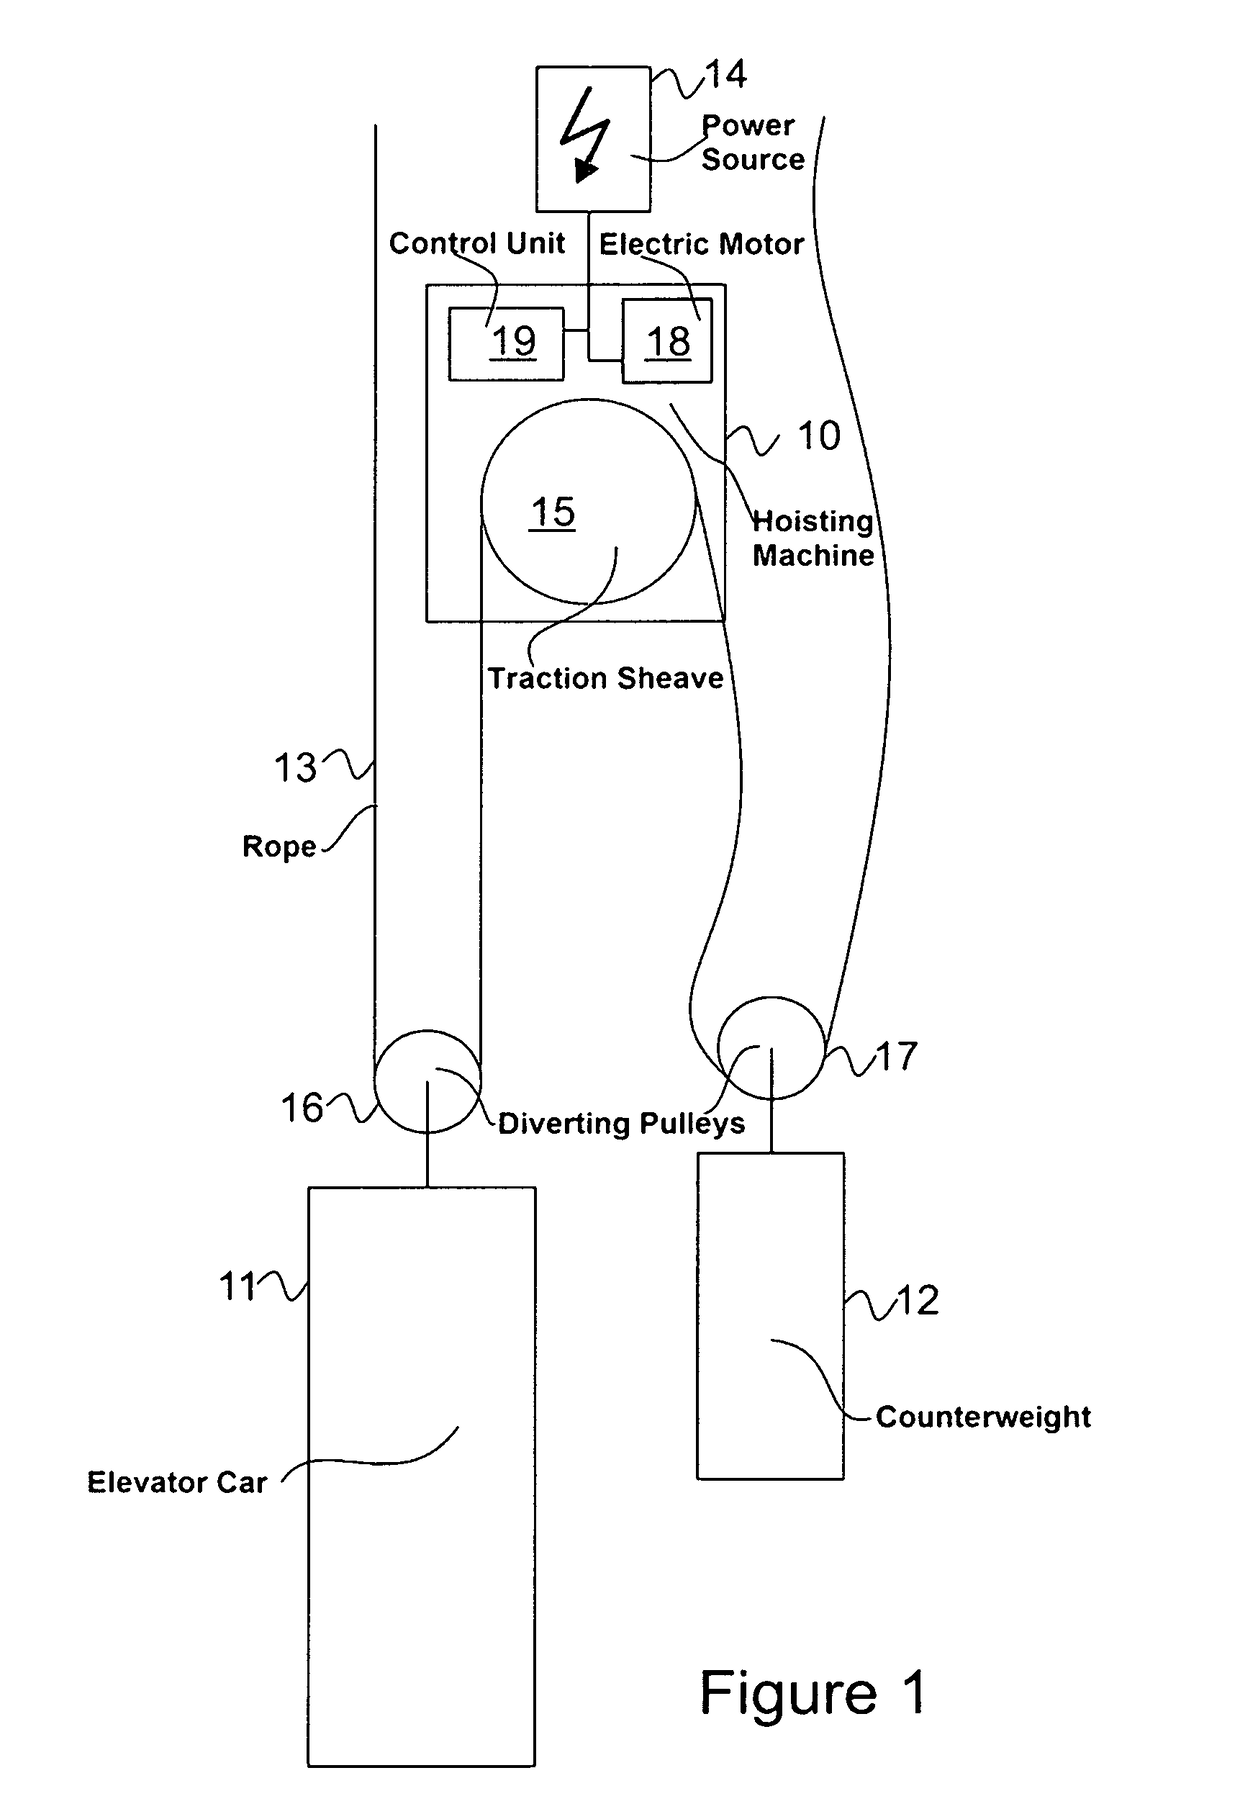 Method and system for detecting a stall condition in an elevator